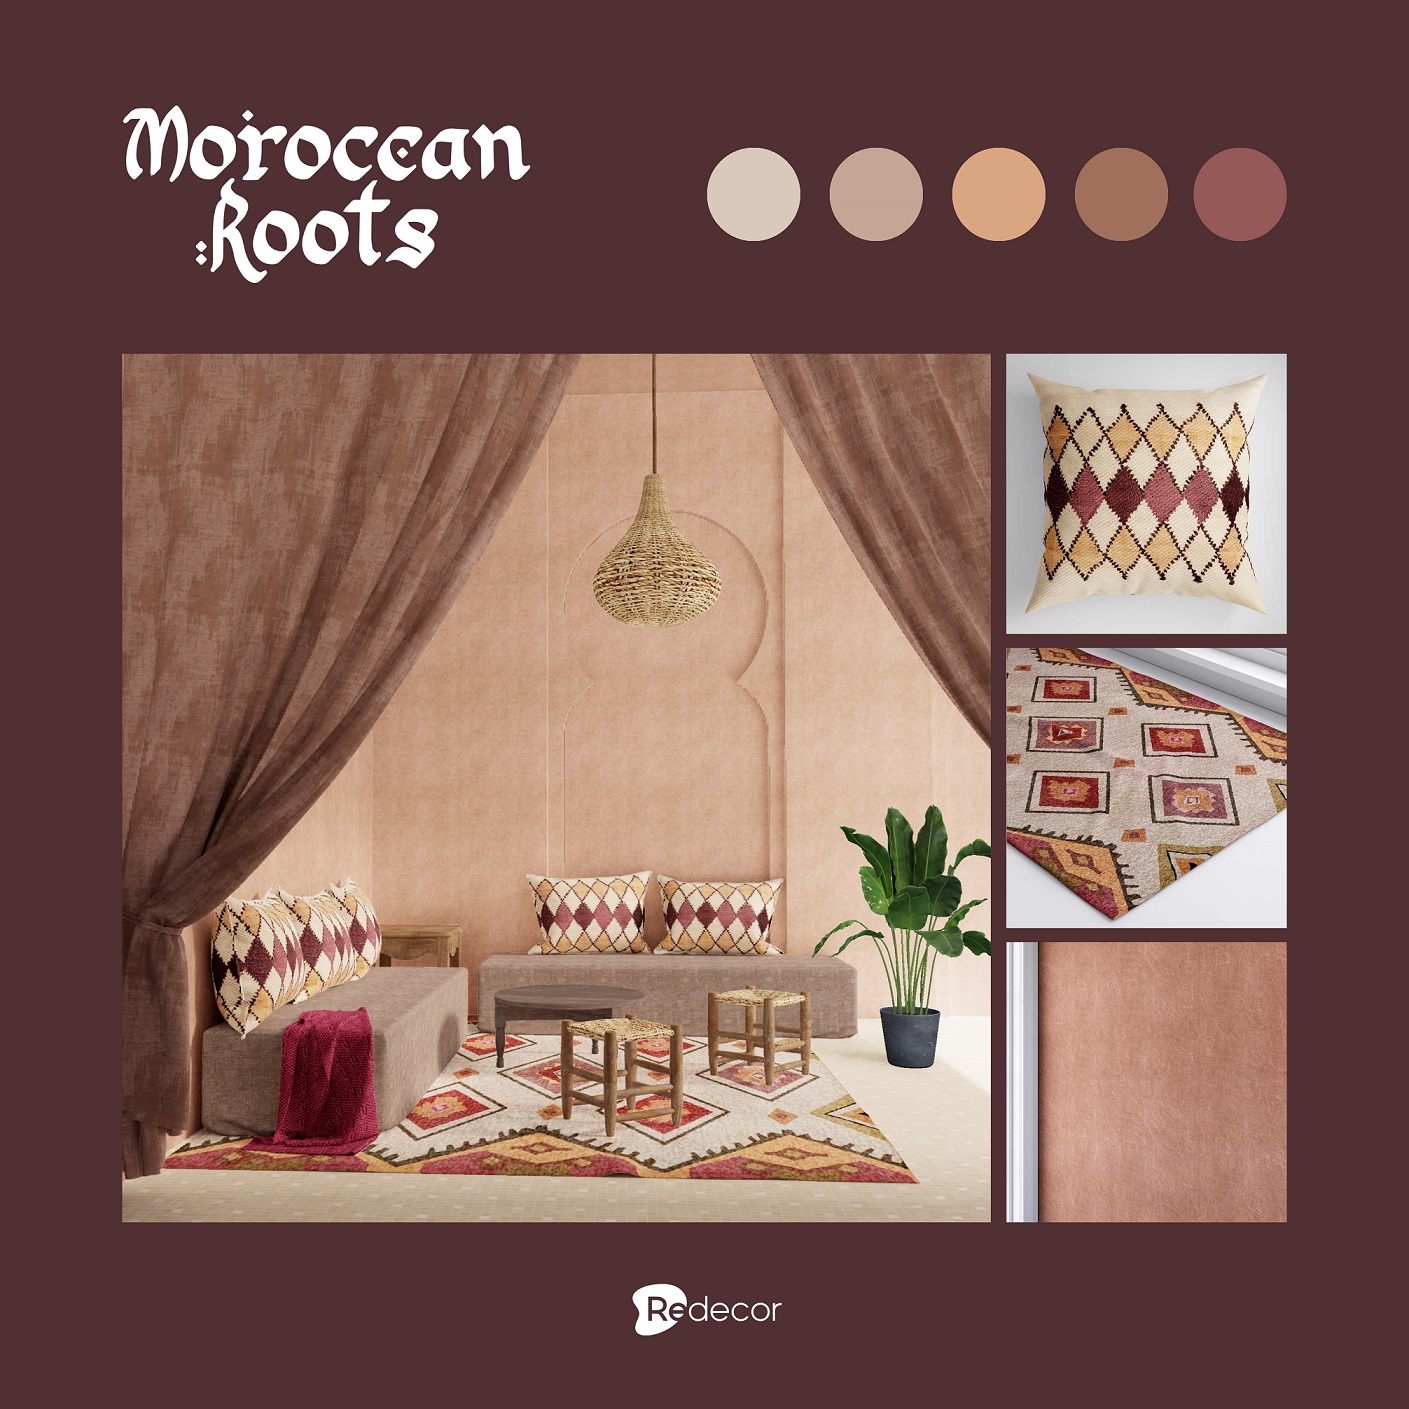 Moroccan inspired living room